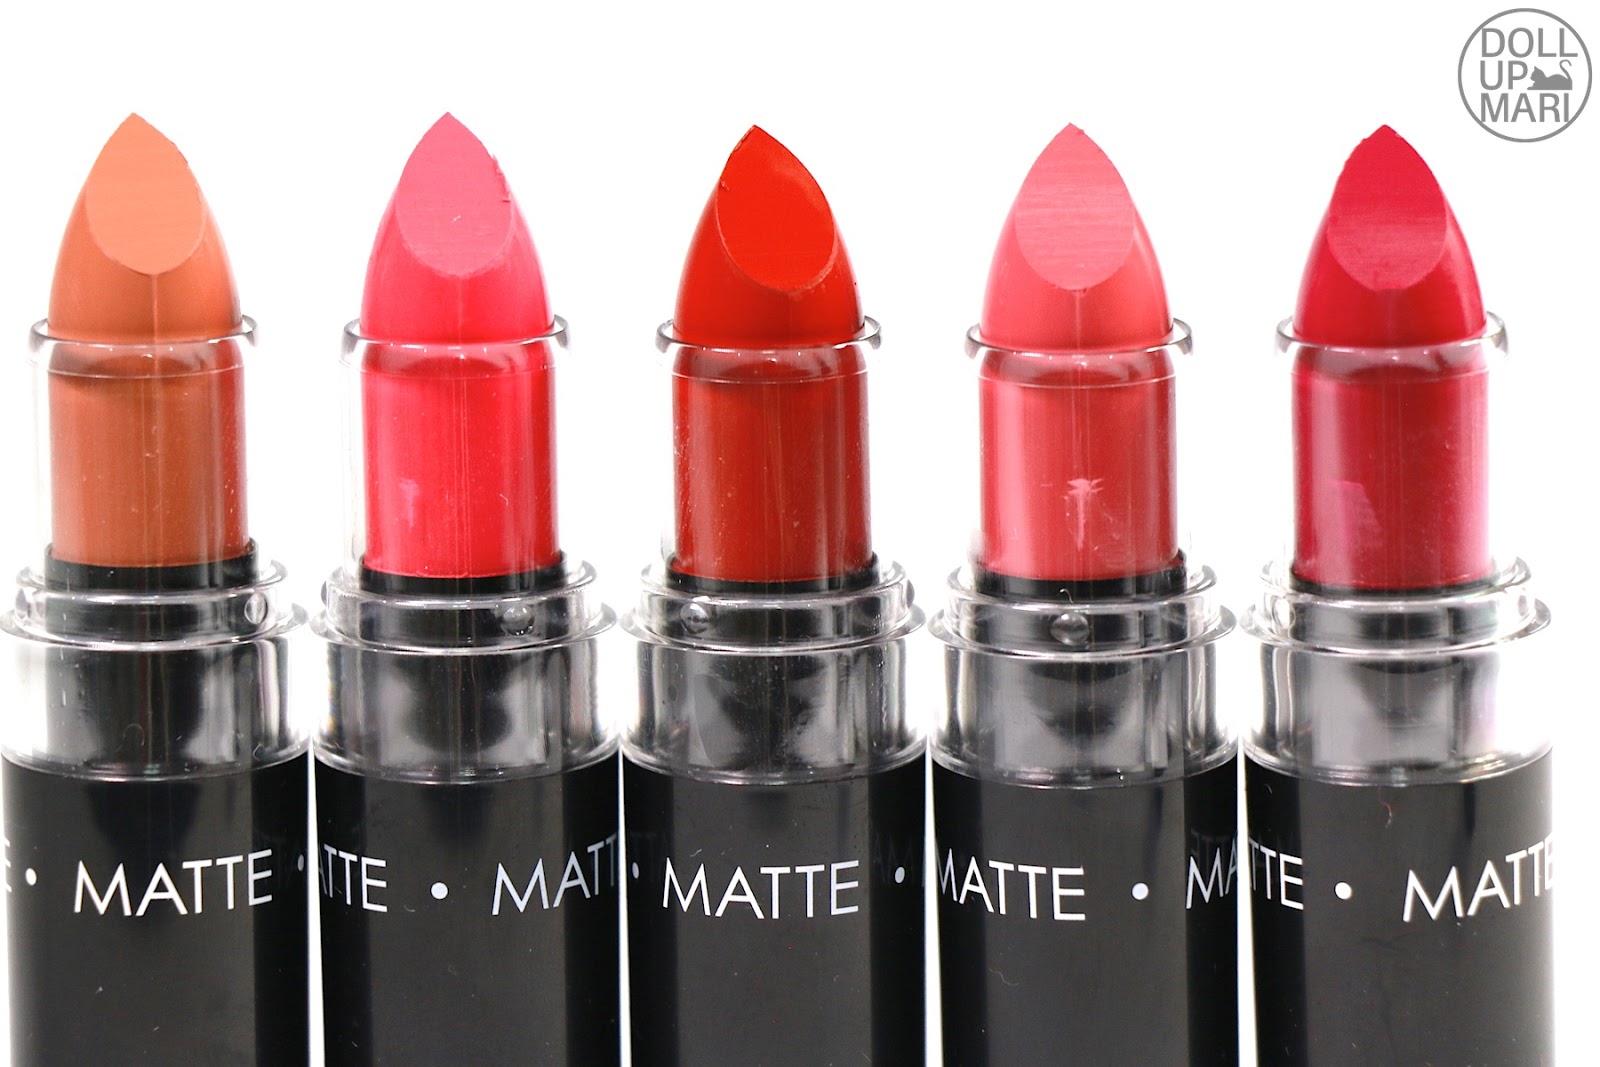 Silkygirl Go Matte Lipsticks Review and Swatches | Doll Up